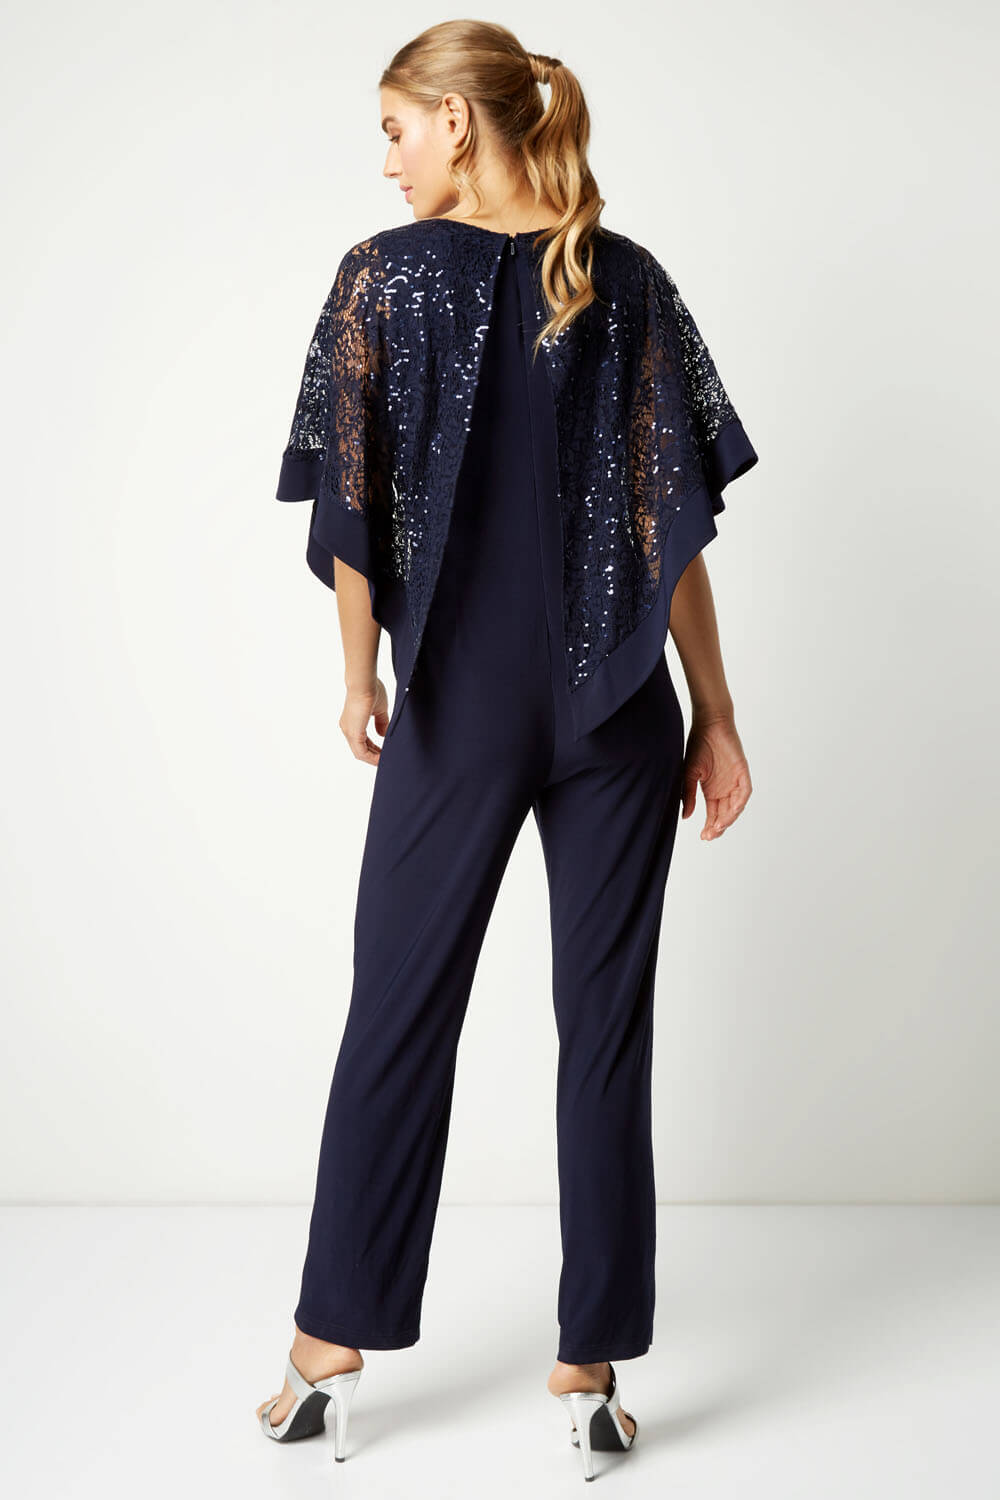 Navy  Sequin Overlay Jumpsuit, Image 3 of 4